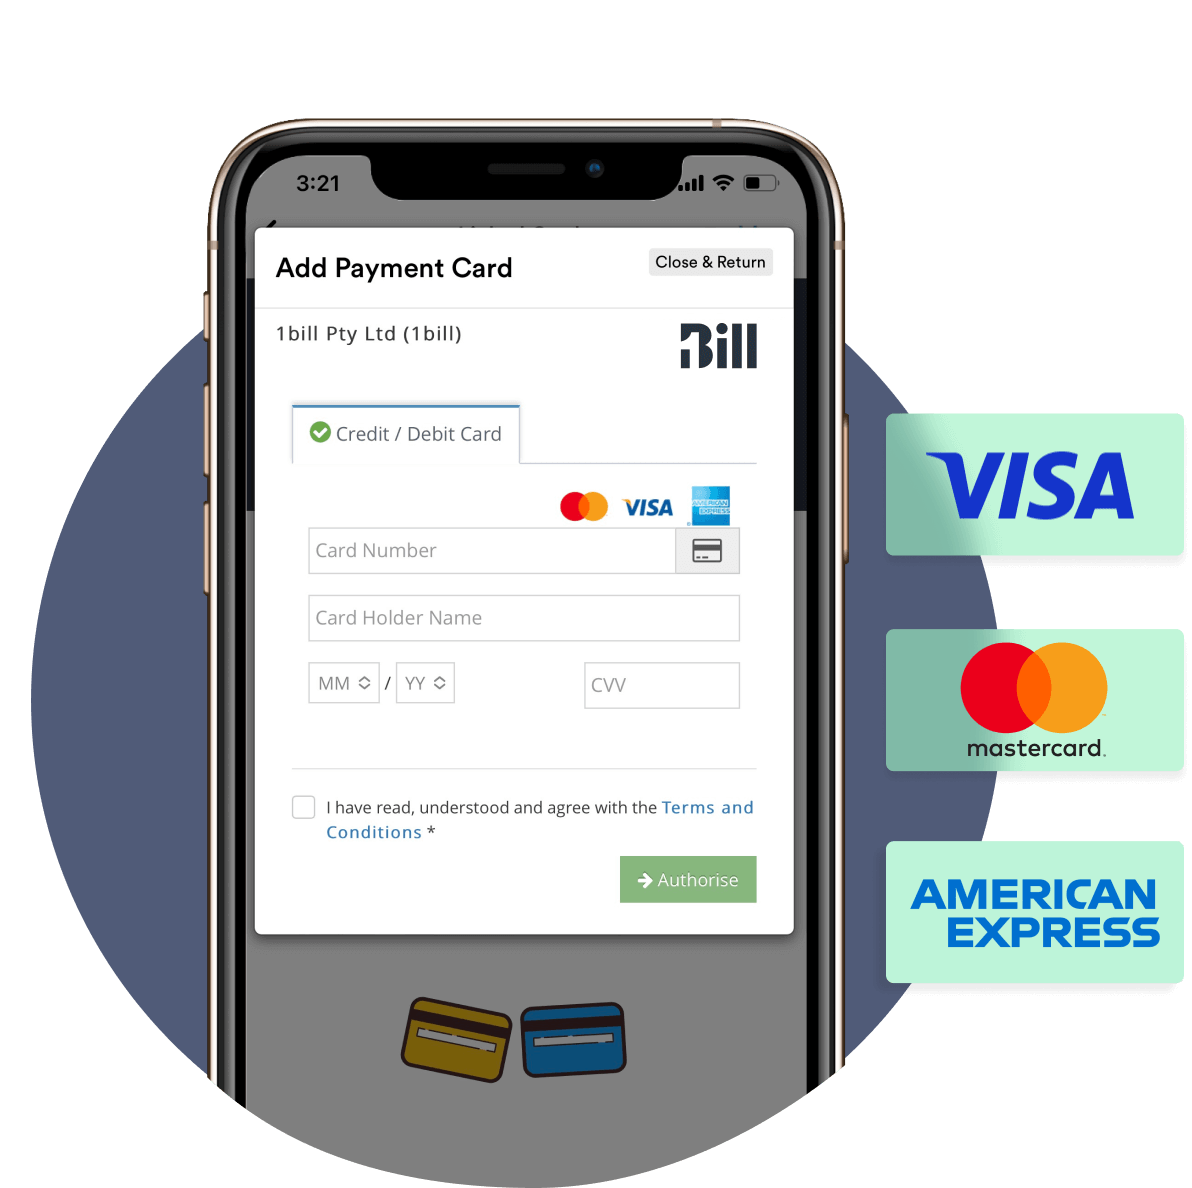 app to pay your bills for you